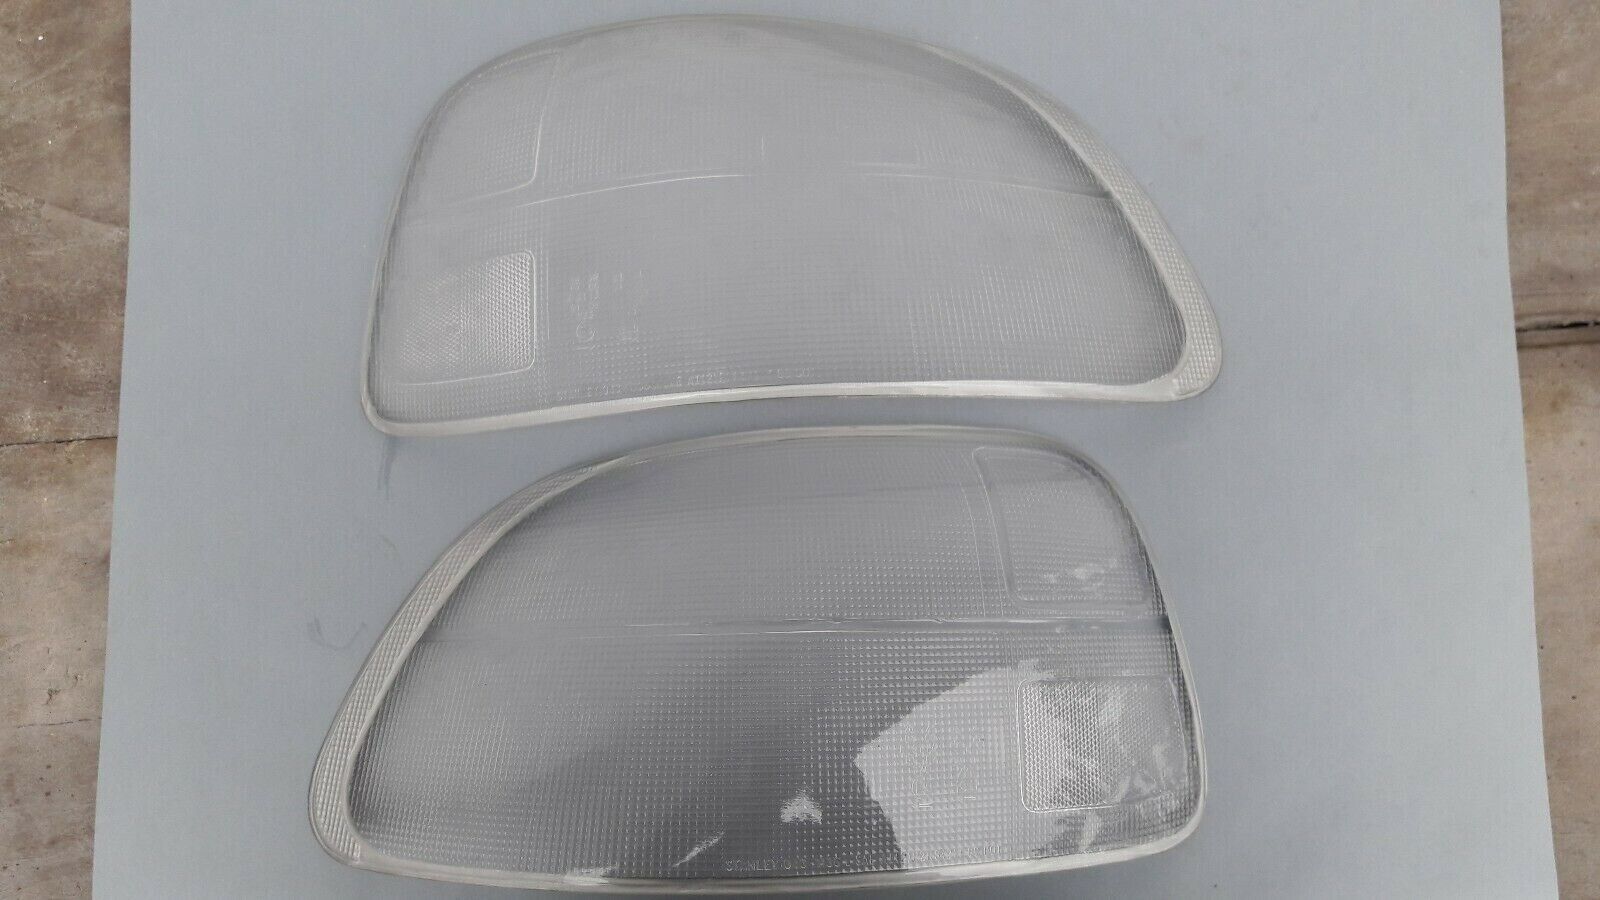 HONDA CIVIC DEL SOL 1993 TO 1997 ALL CLEAR TAILLIGHT LENSES